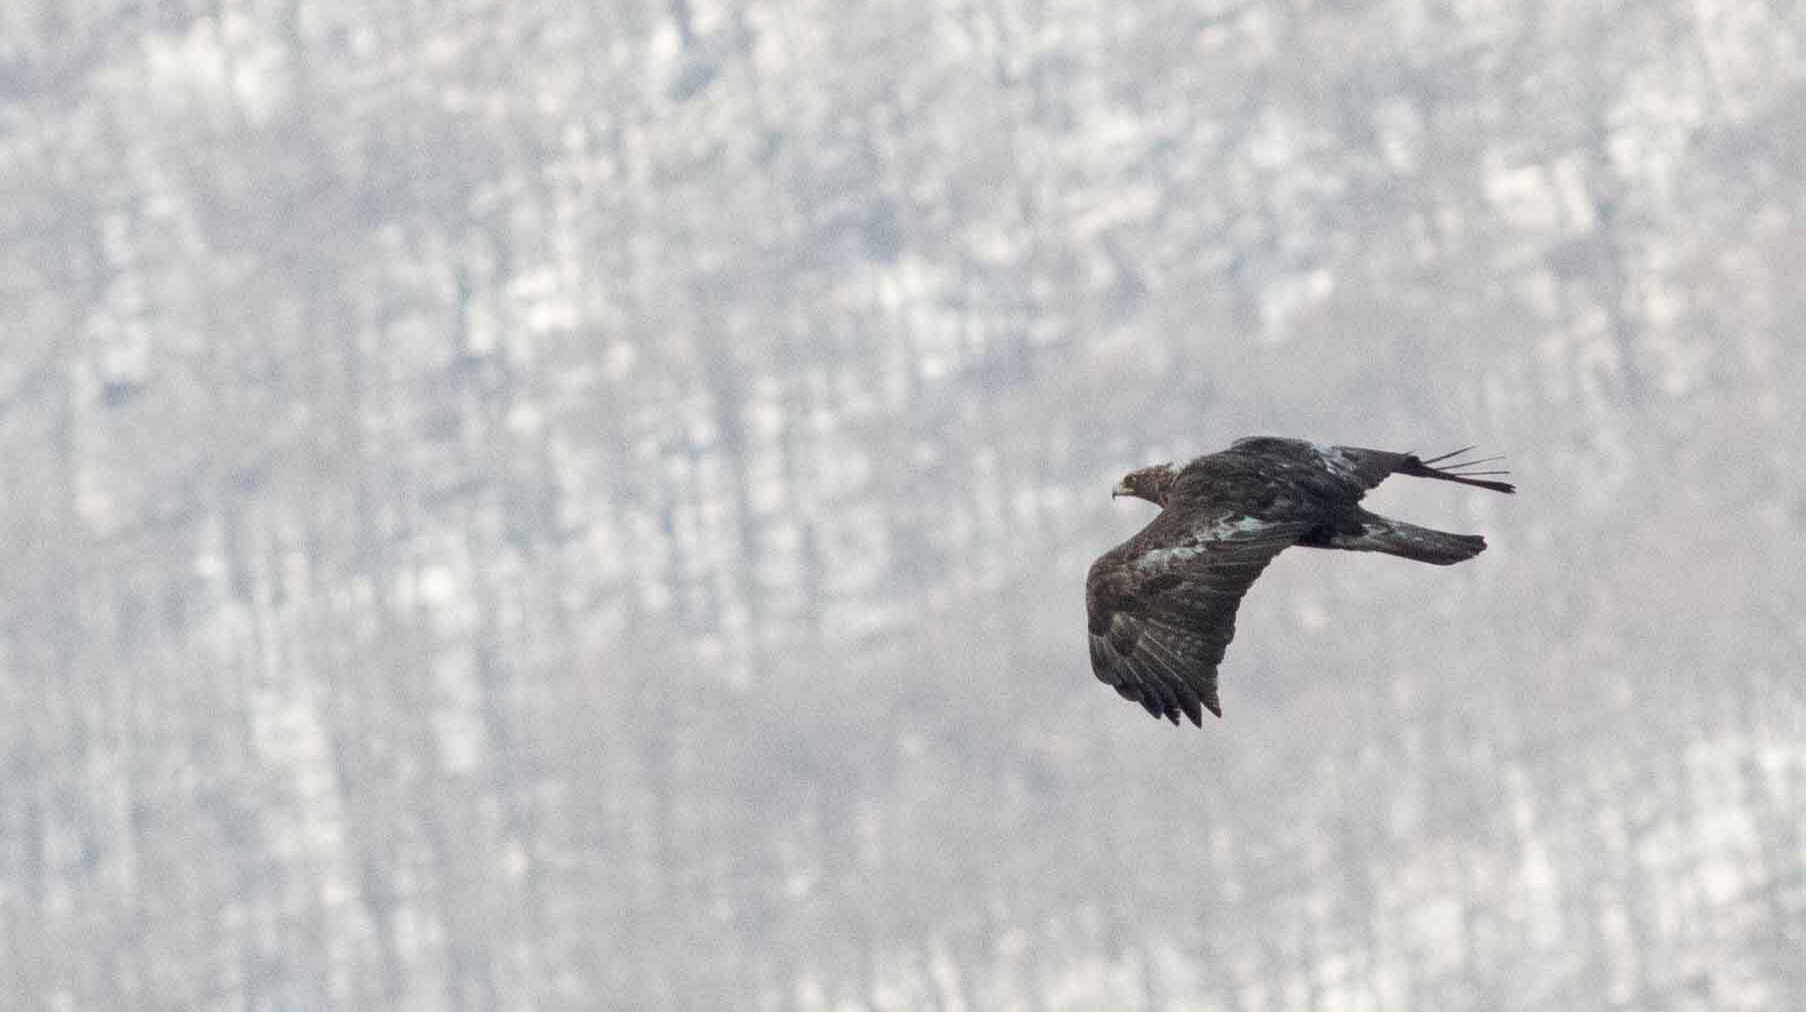 Adult Golden Eagle flying past the hawkwatch. Courtesy of Nick Bolgiano.